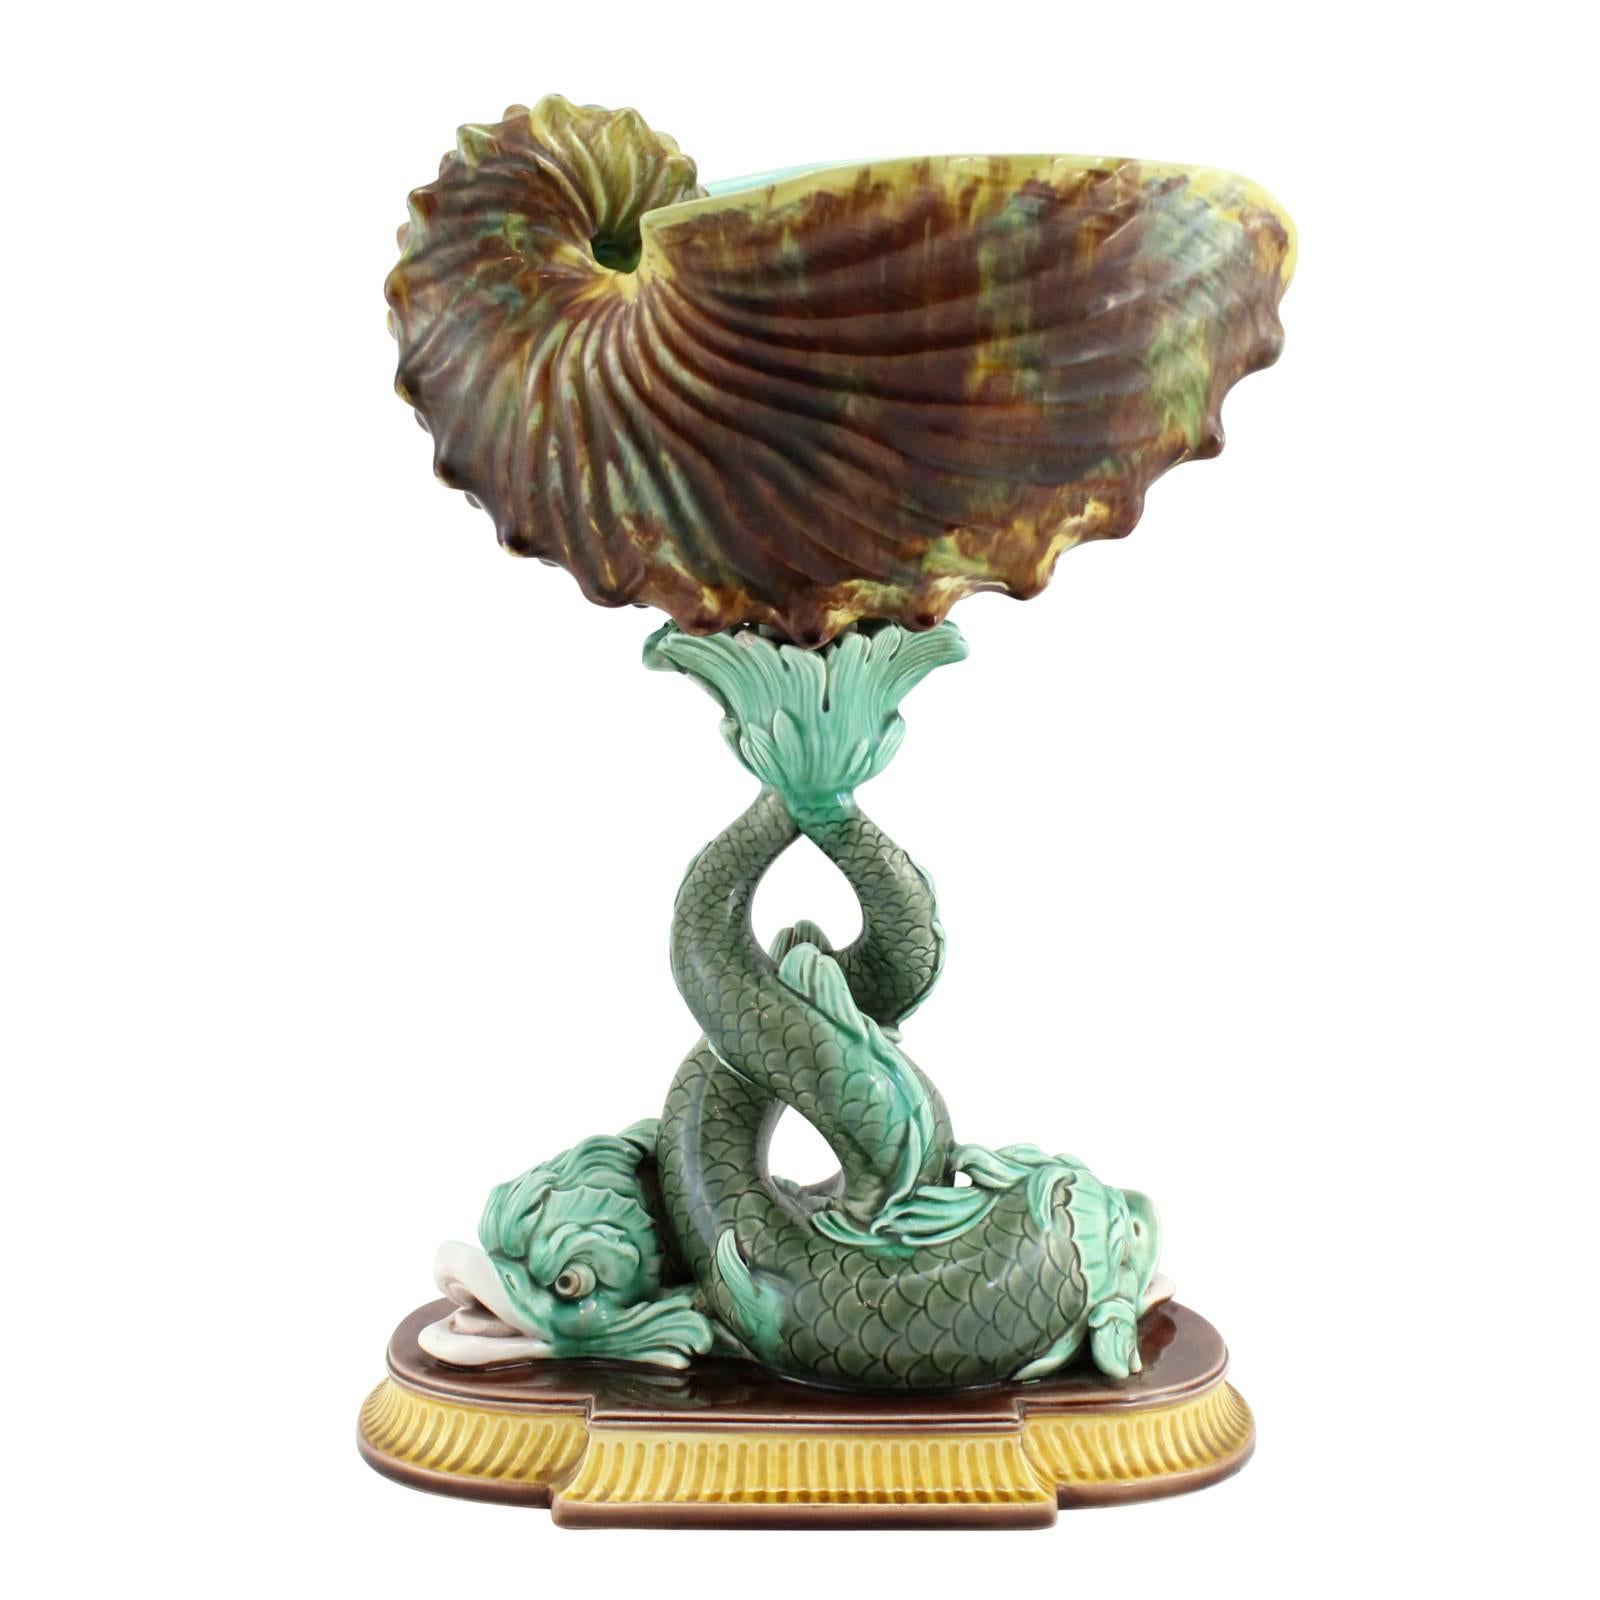 19th Century Majolica Centerpiece by Wedgwood